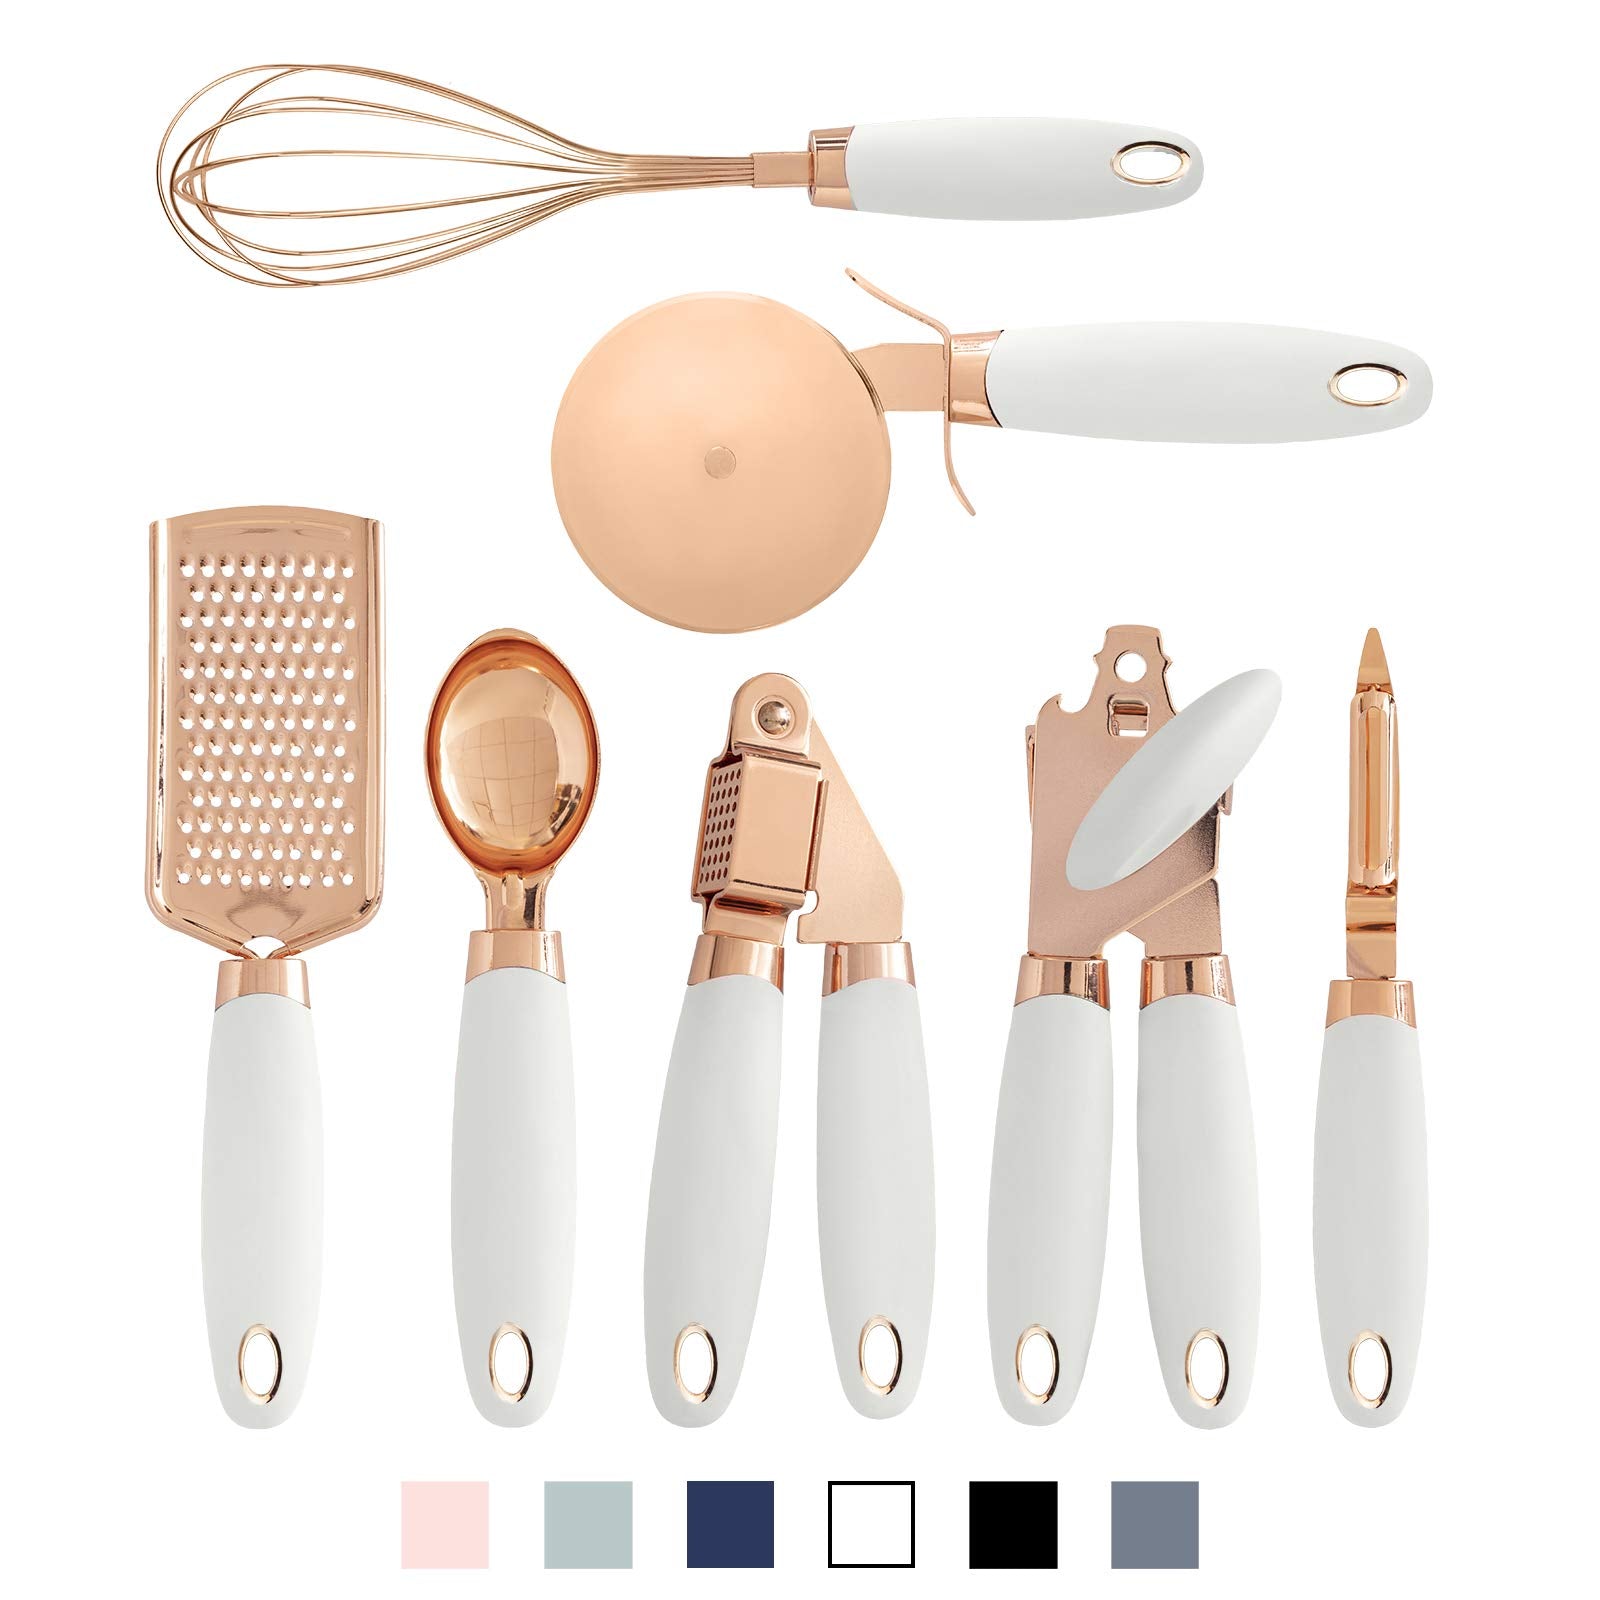 COOK With COLOR 7 Pc Kitchen Gadget Set Copper Coated Stainless Steel Utensils with Soft Touch White Handles - Opticdeals